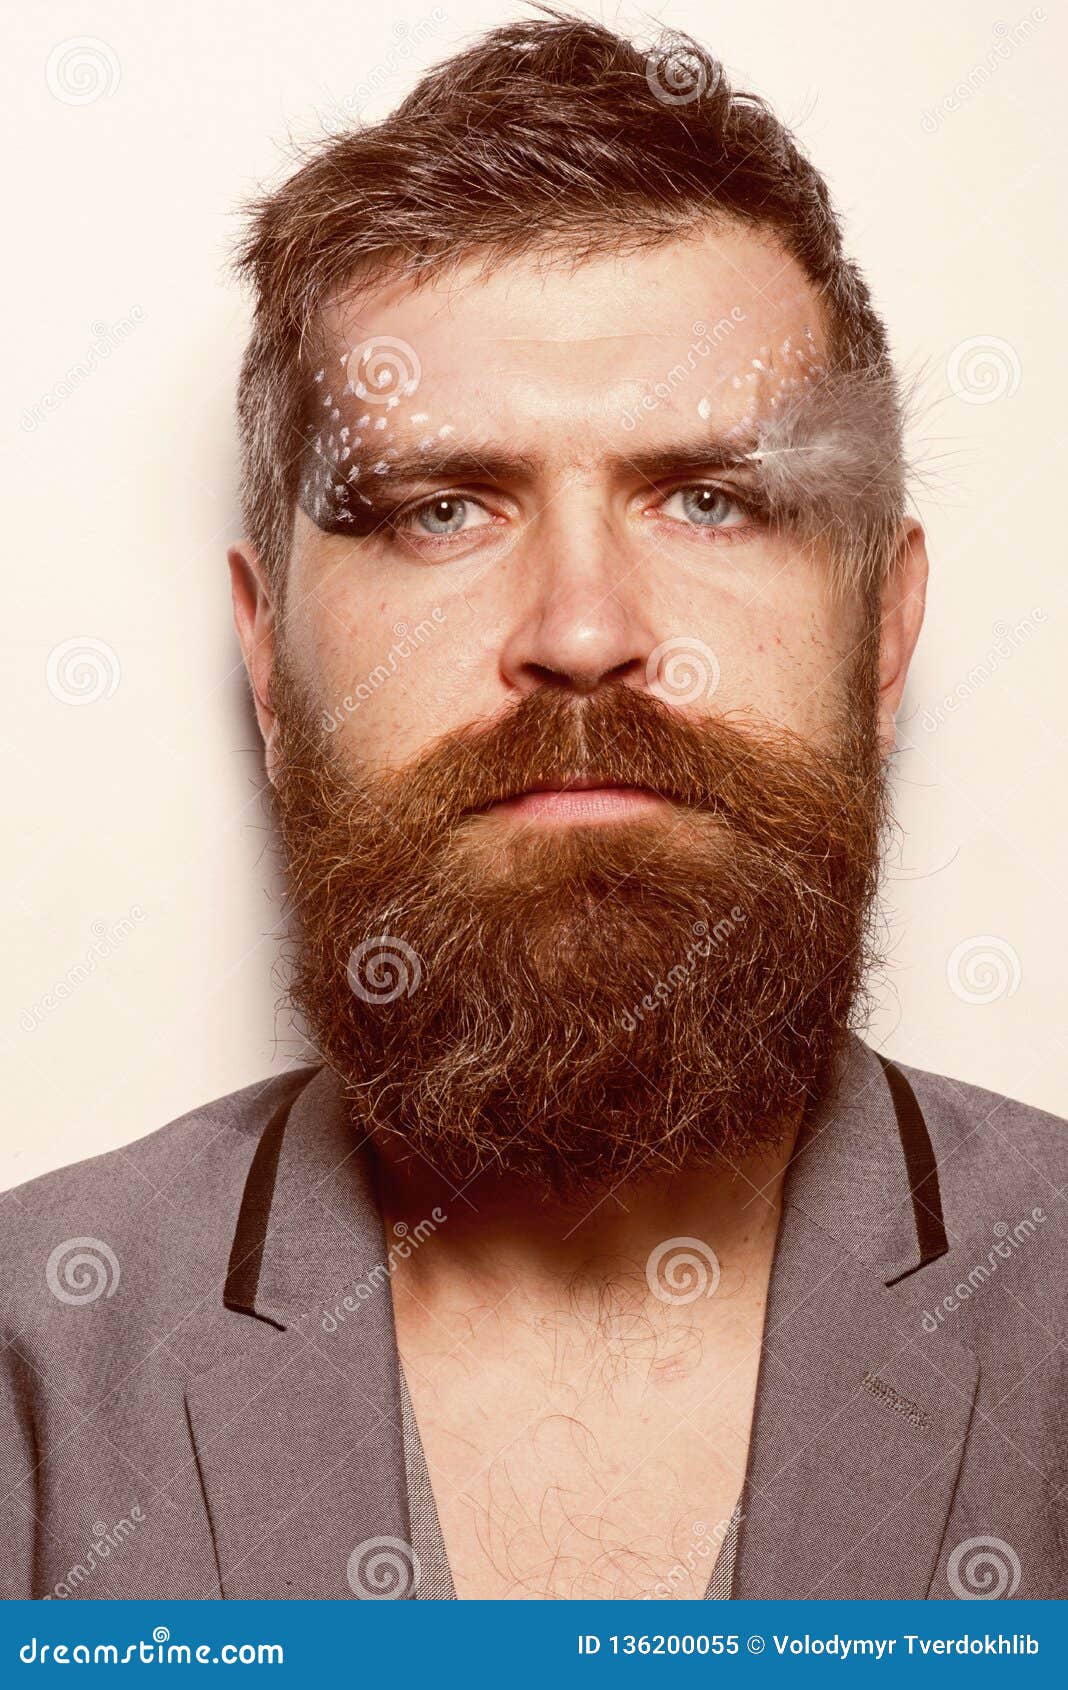 Makeup And Make Up. Bearded Man With Creative Makeup And Feather. Man